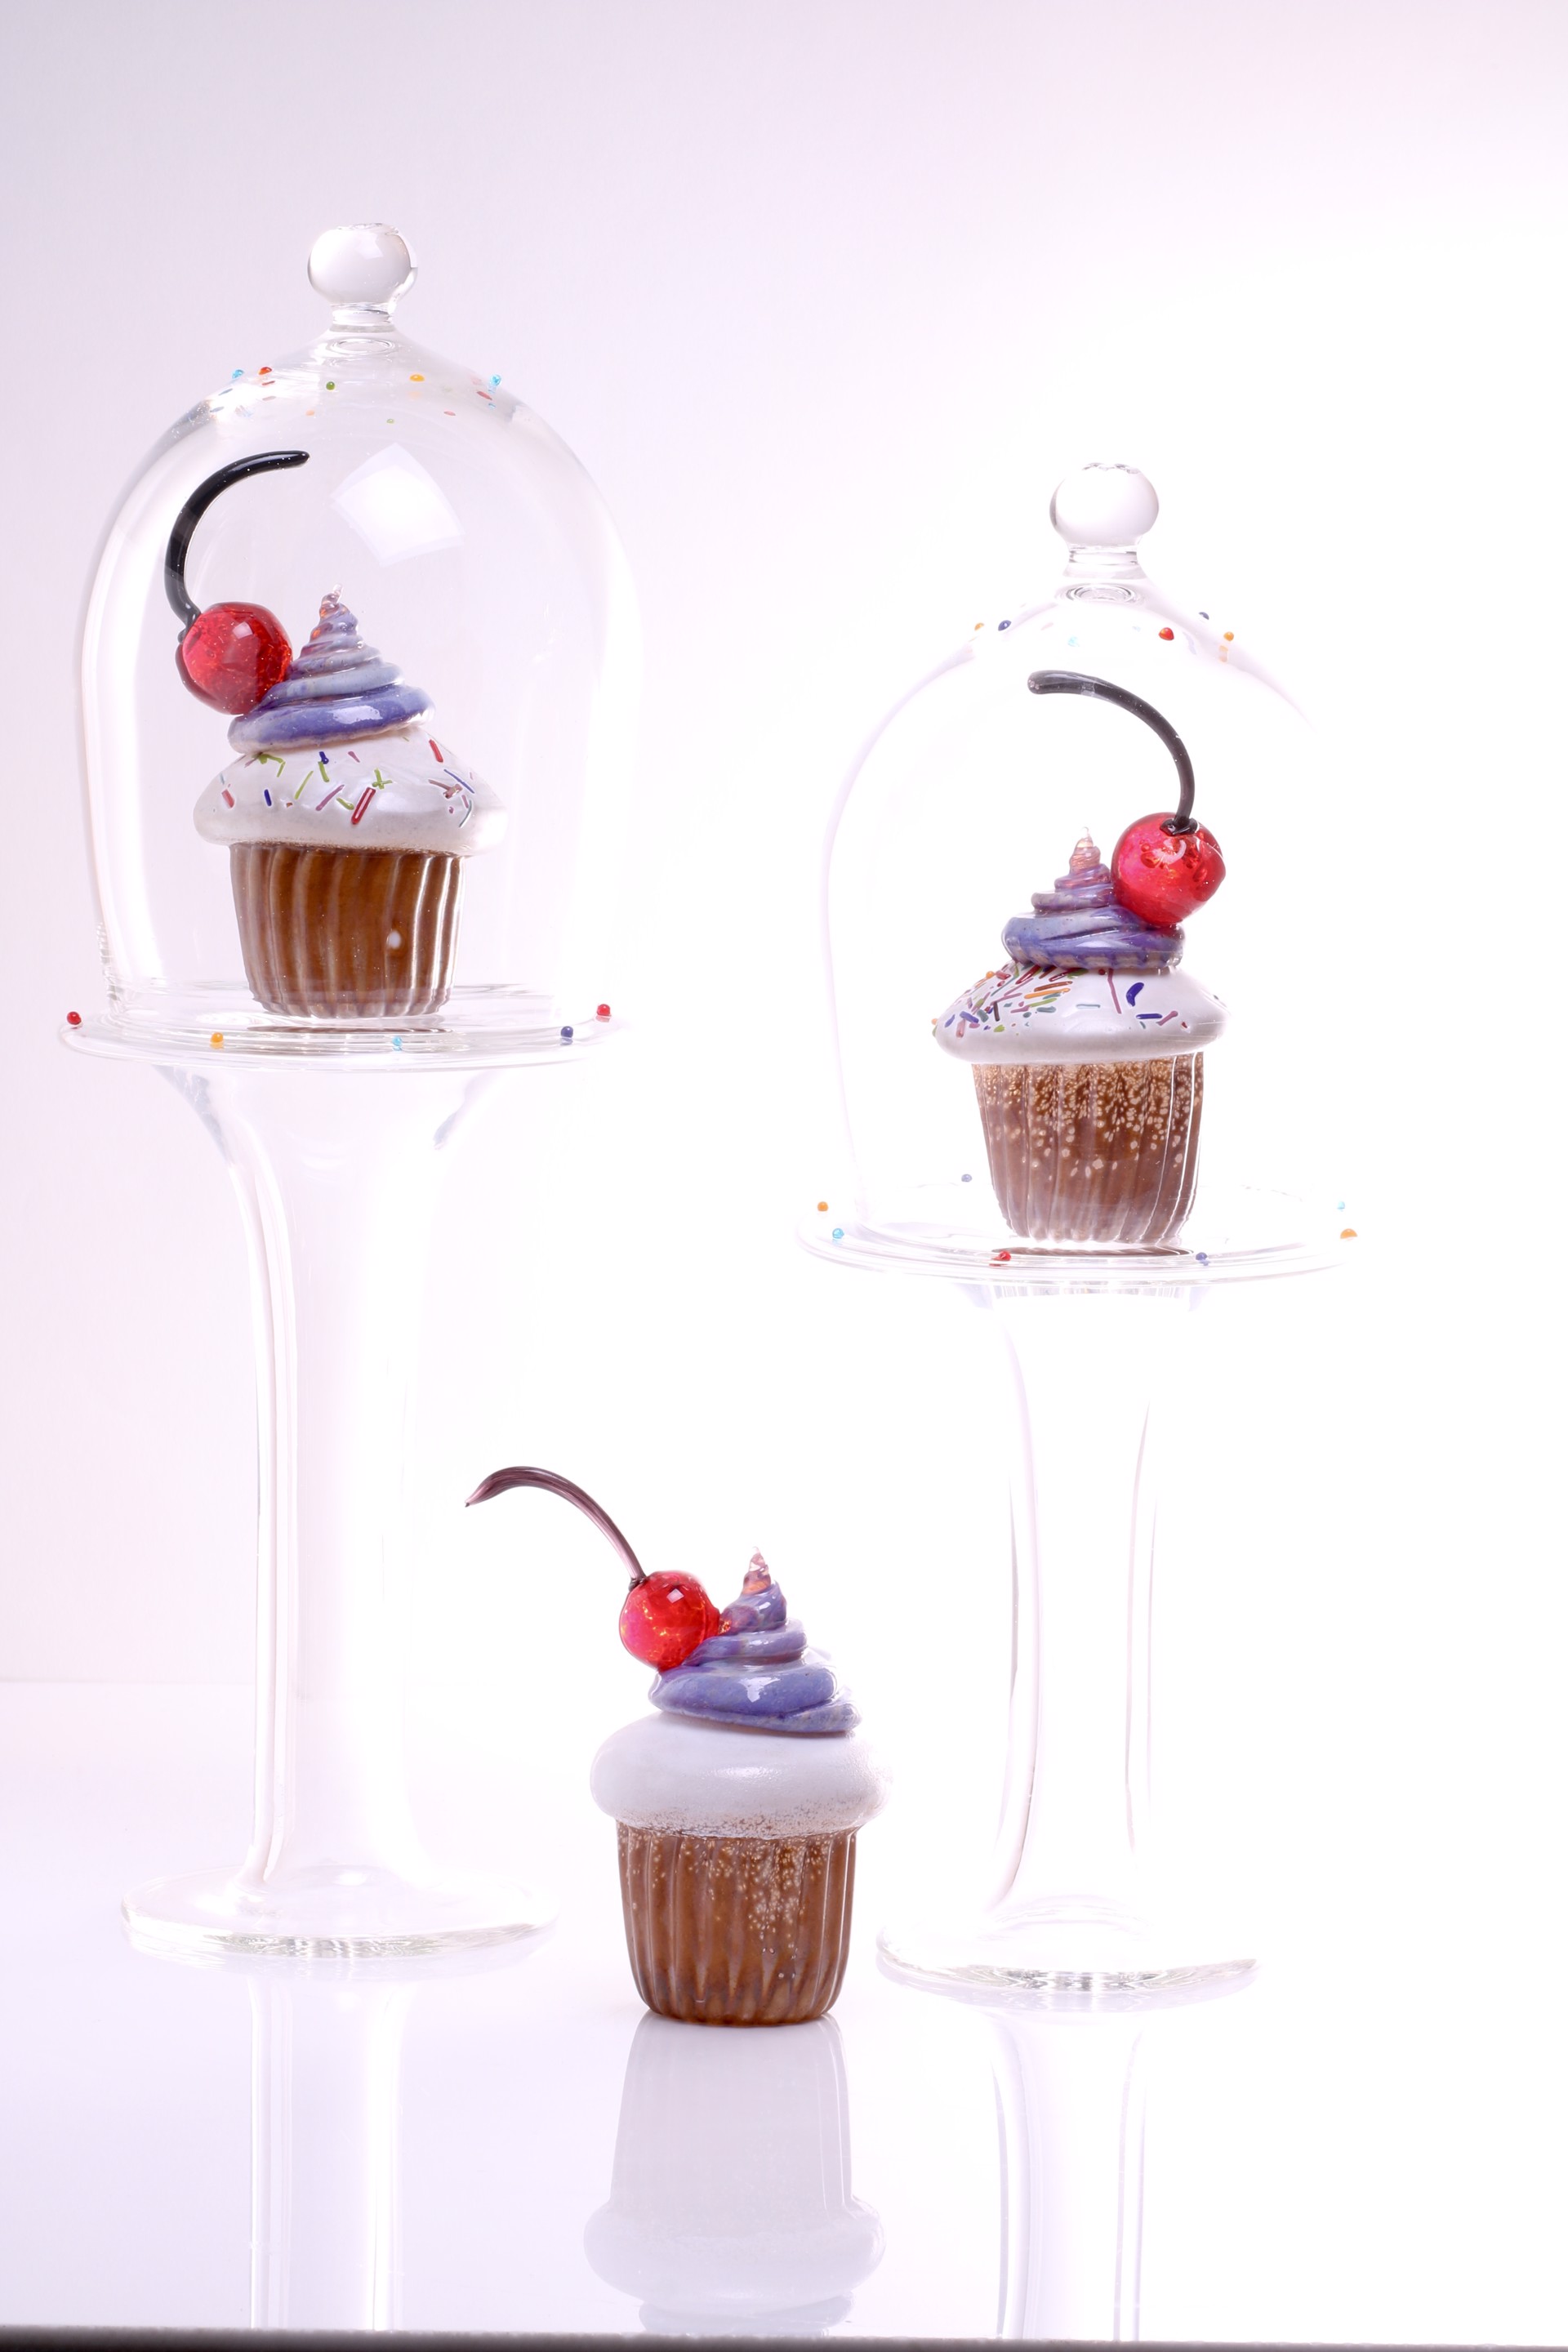 Lonely Cupcake Set by Ben Silver